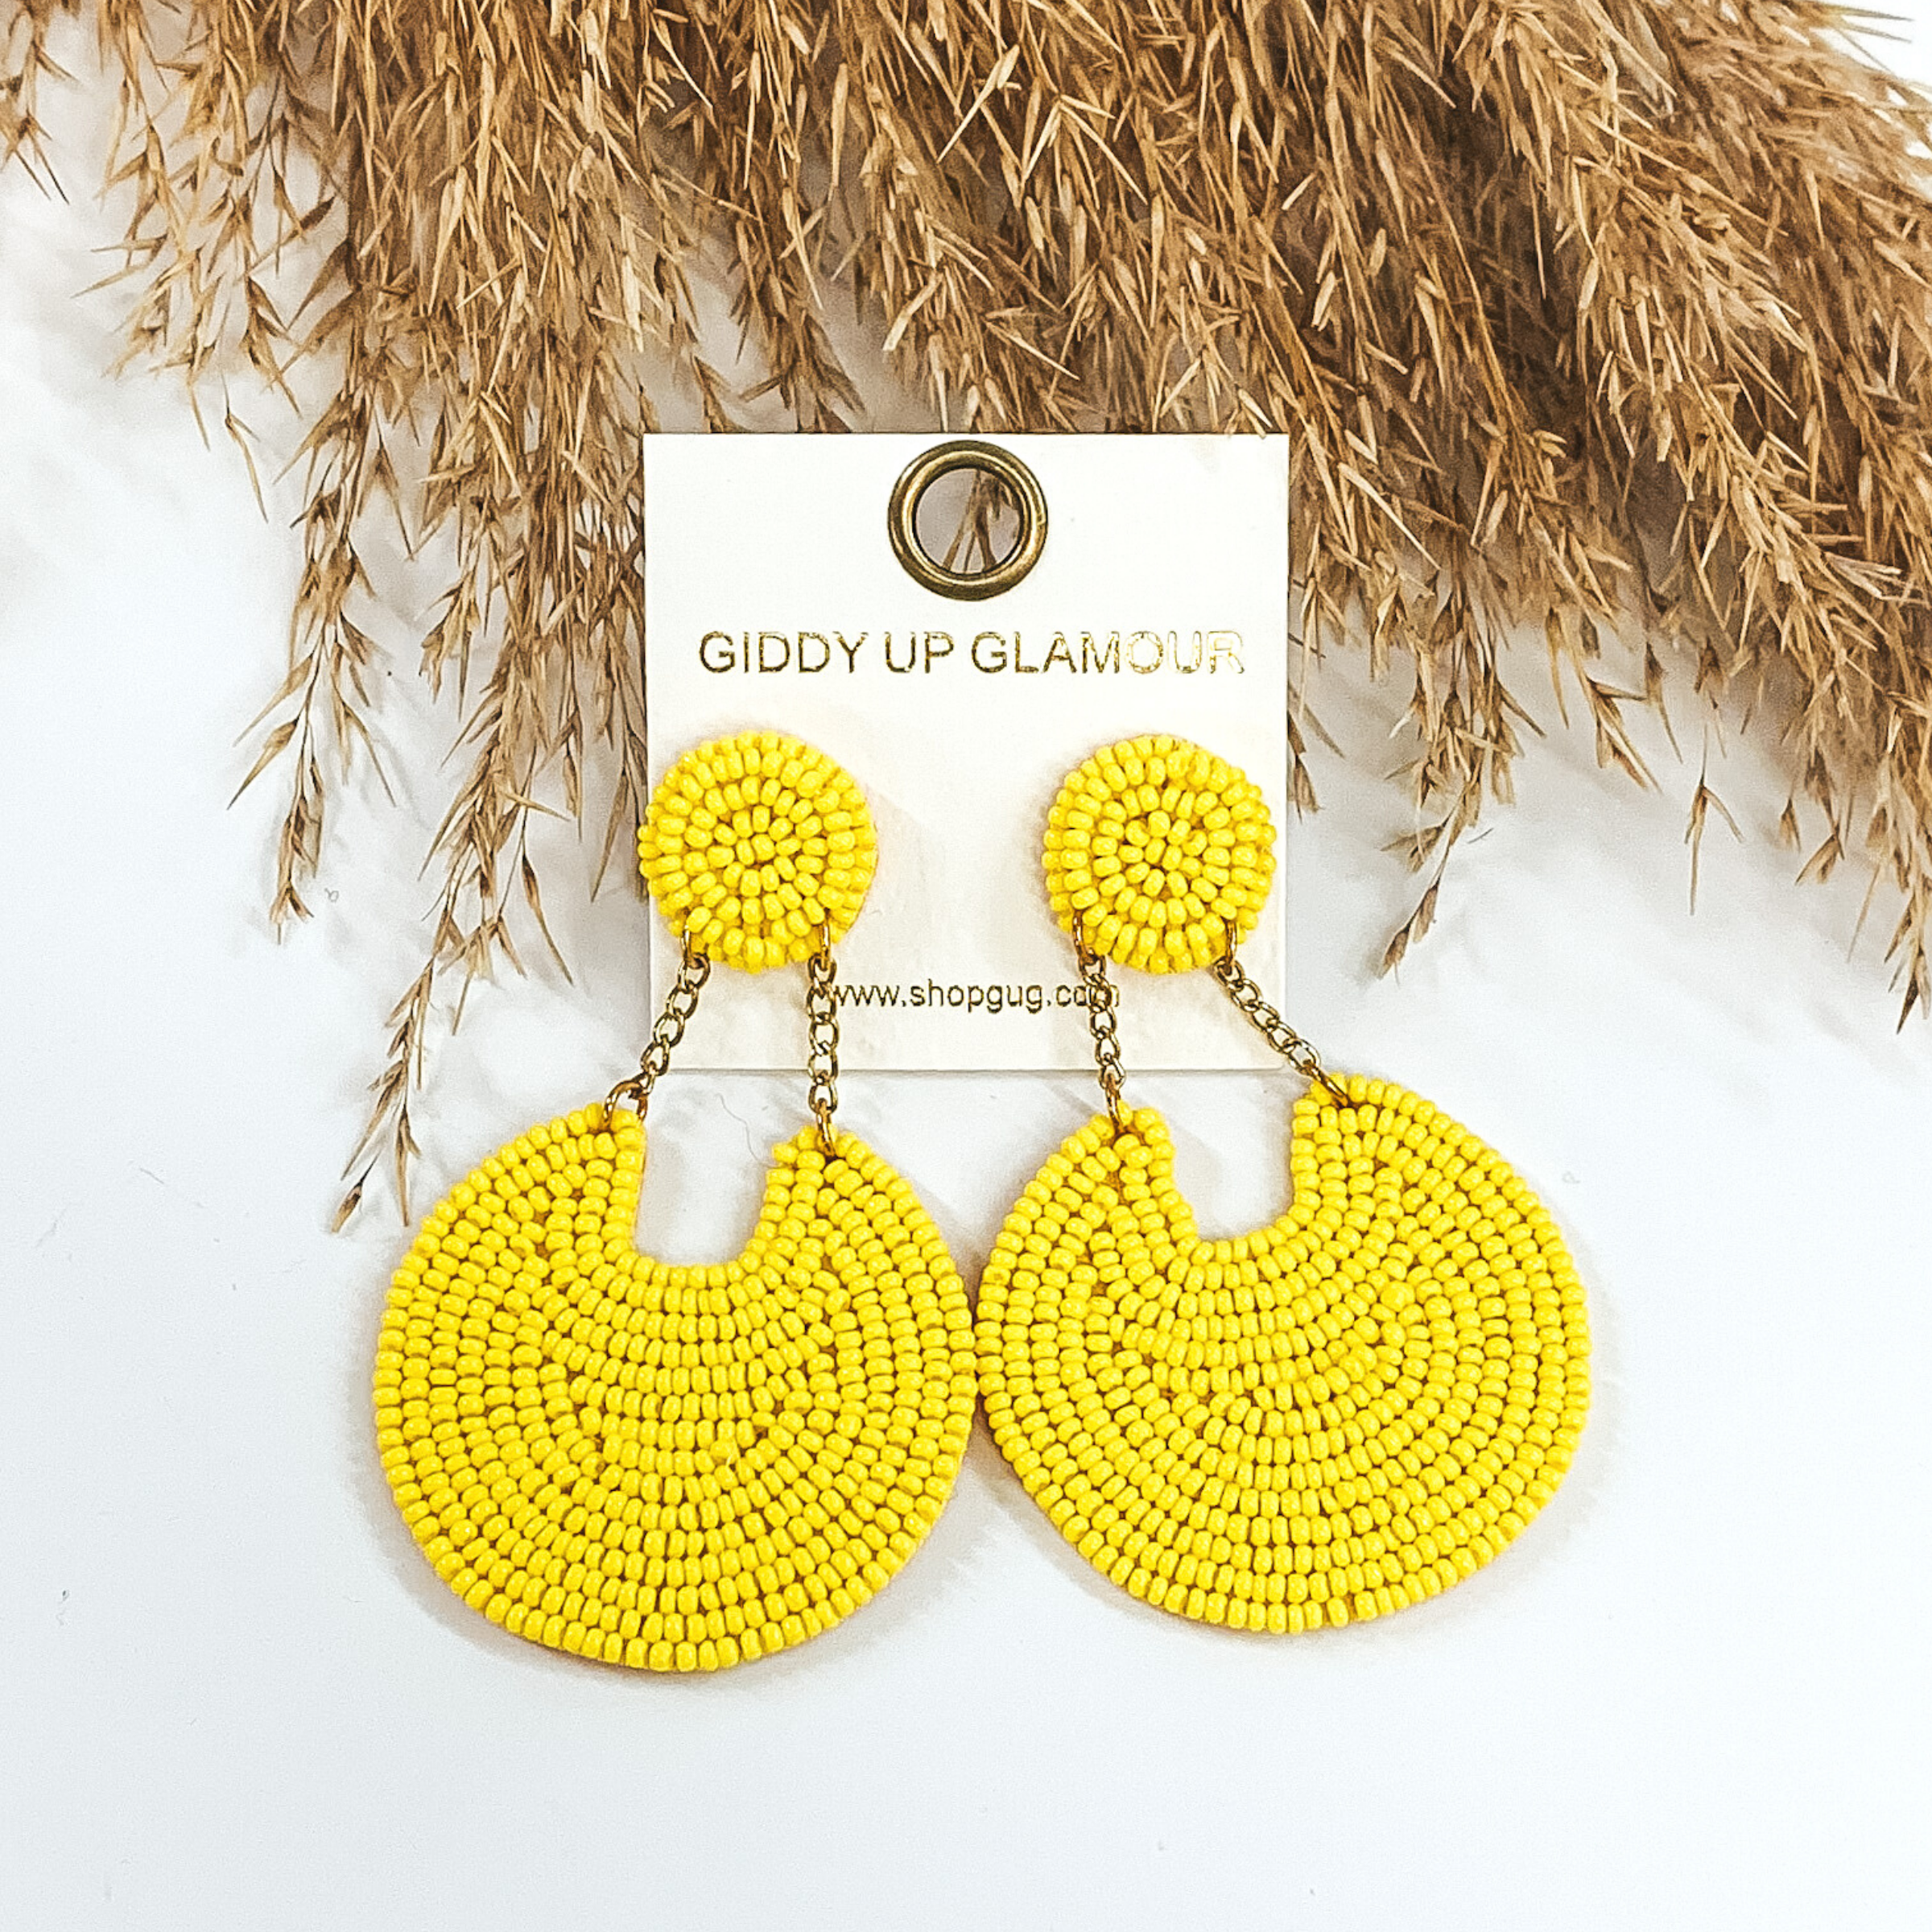 These earrings are covered in yellow beads. There is a circle stud with two gold chains that hold a bigger, hanging circle that has a notch out of the top. These earrings are pictured on a white background with tan floral at the top of the picture.